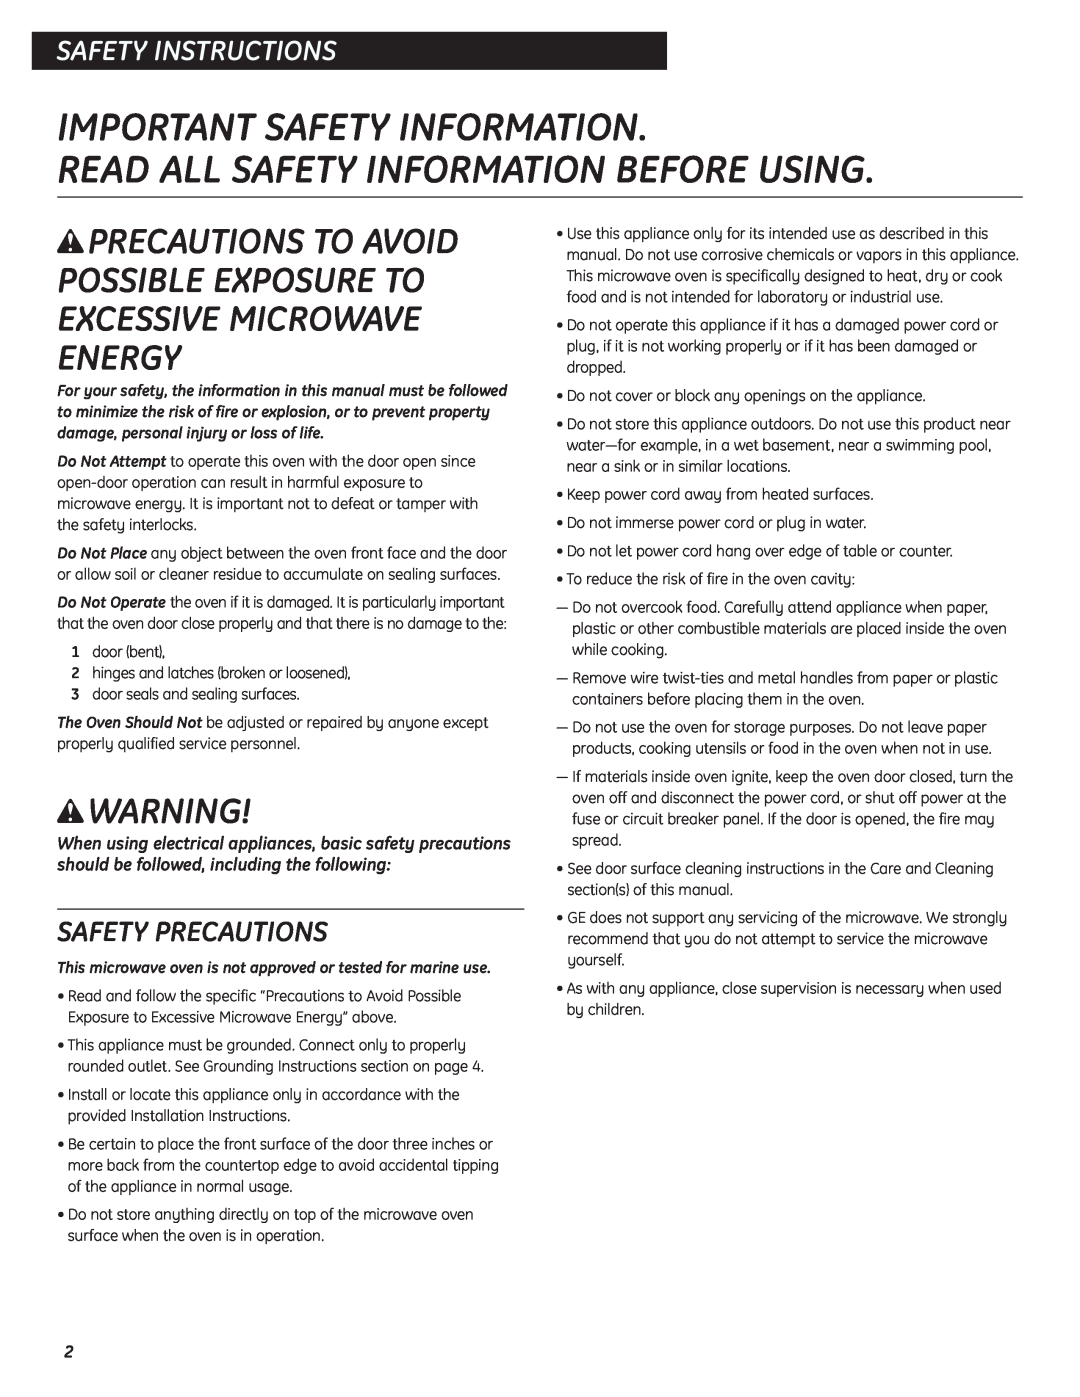 GE JES737 Important Safety Information, Read All Safety Information Before Using, wPRECAUTIONS TO AVOID, wWARNING 